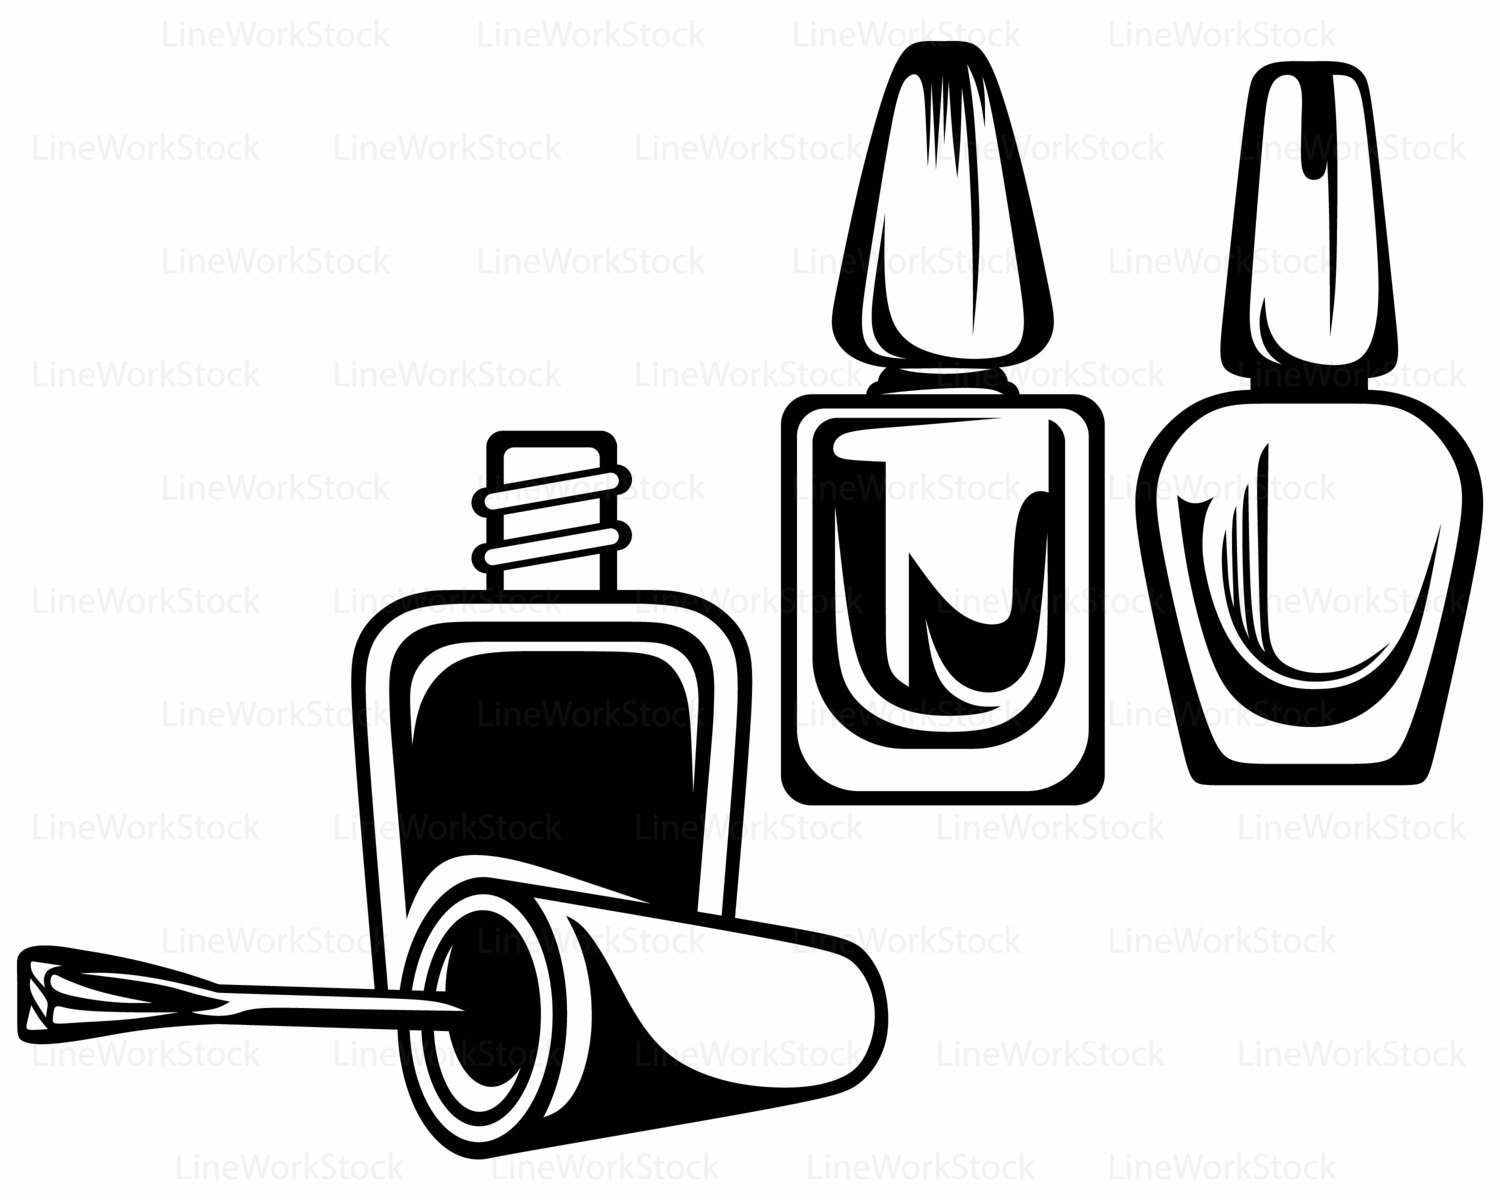 7. Nail polish bottle clip art black and white silhouette - wide 8